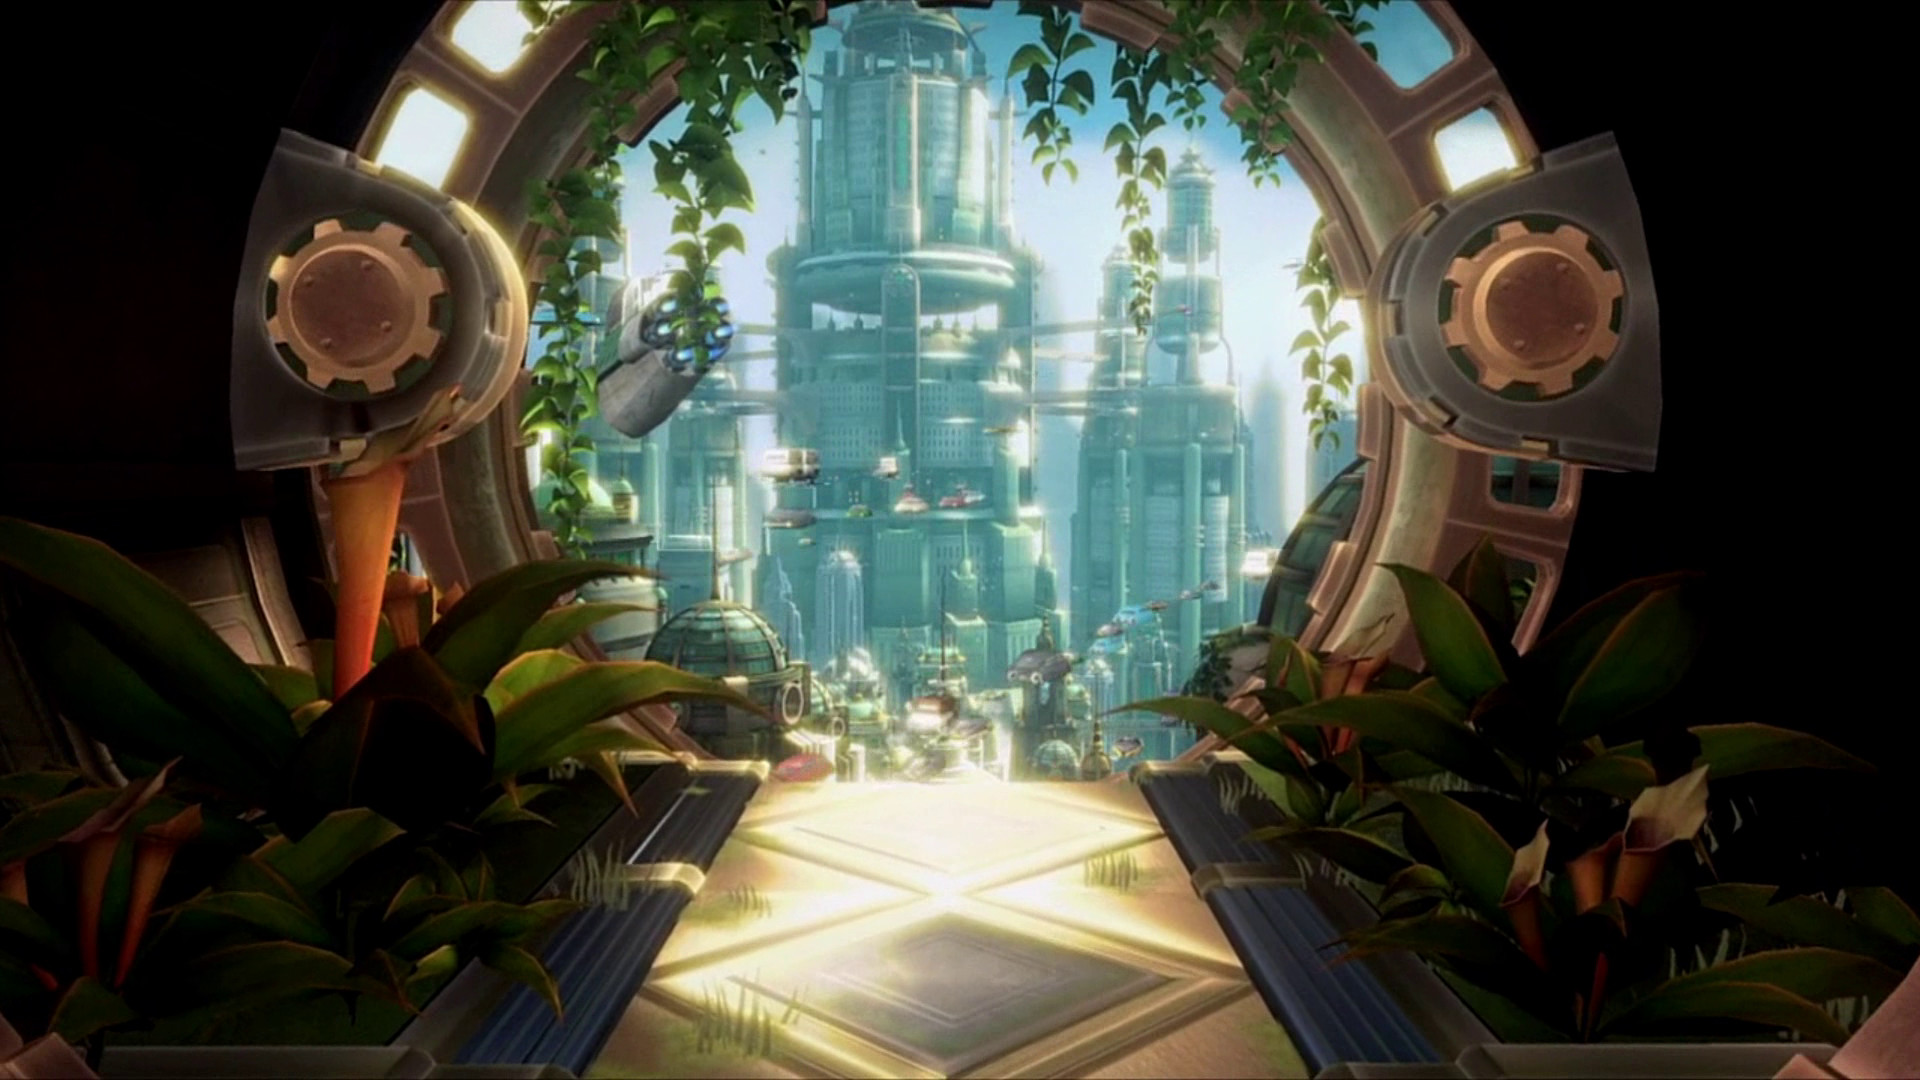 1920x1080 ... Ratchet and Clank - Metropolis Animated Wallpaper by s0me-1